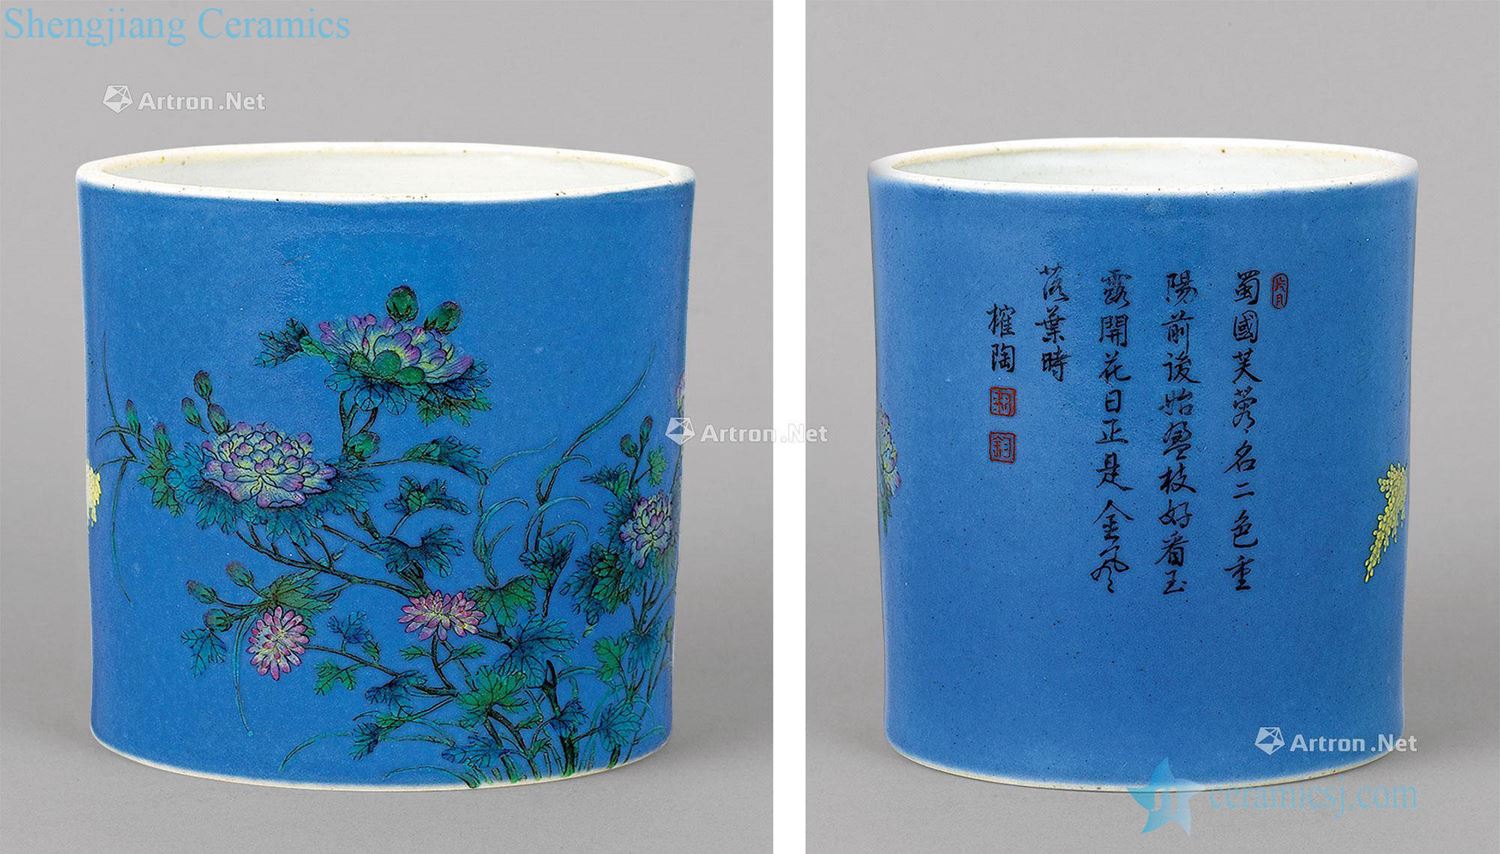 Qing qianlong to pastel blue flowers poetry pen container